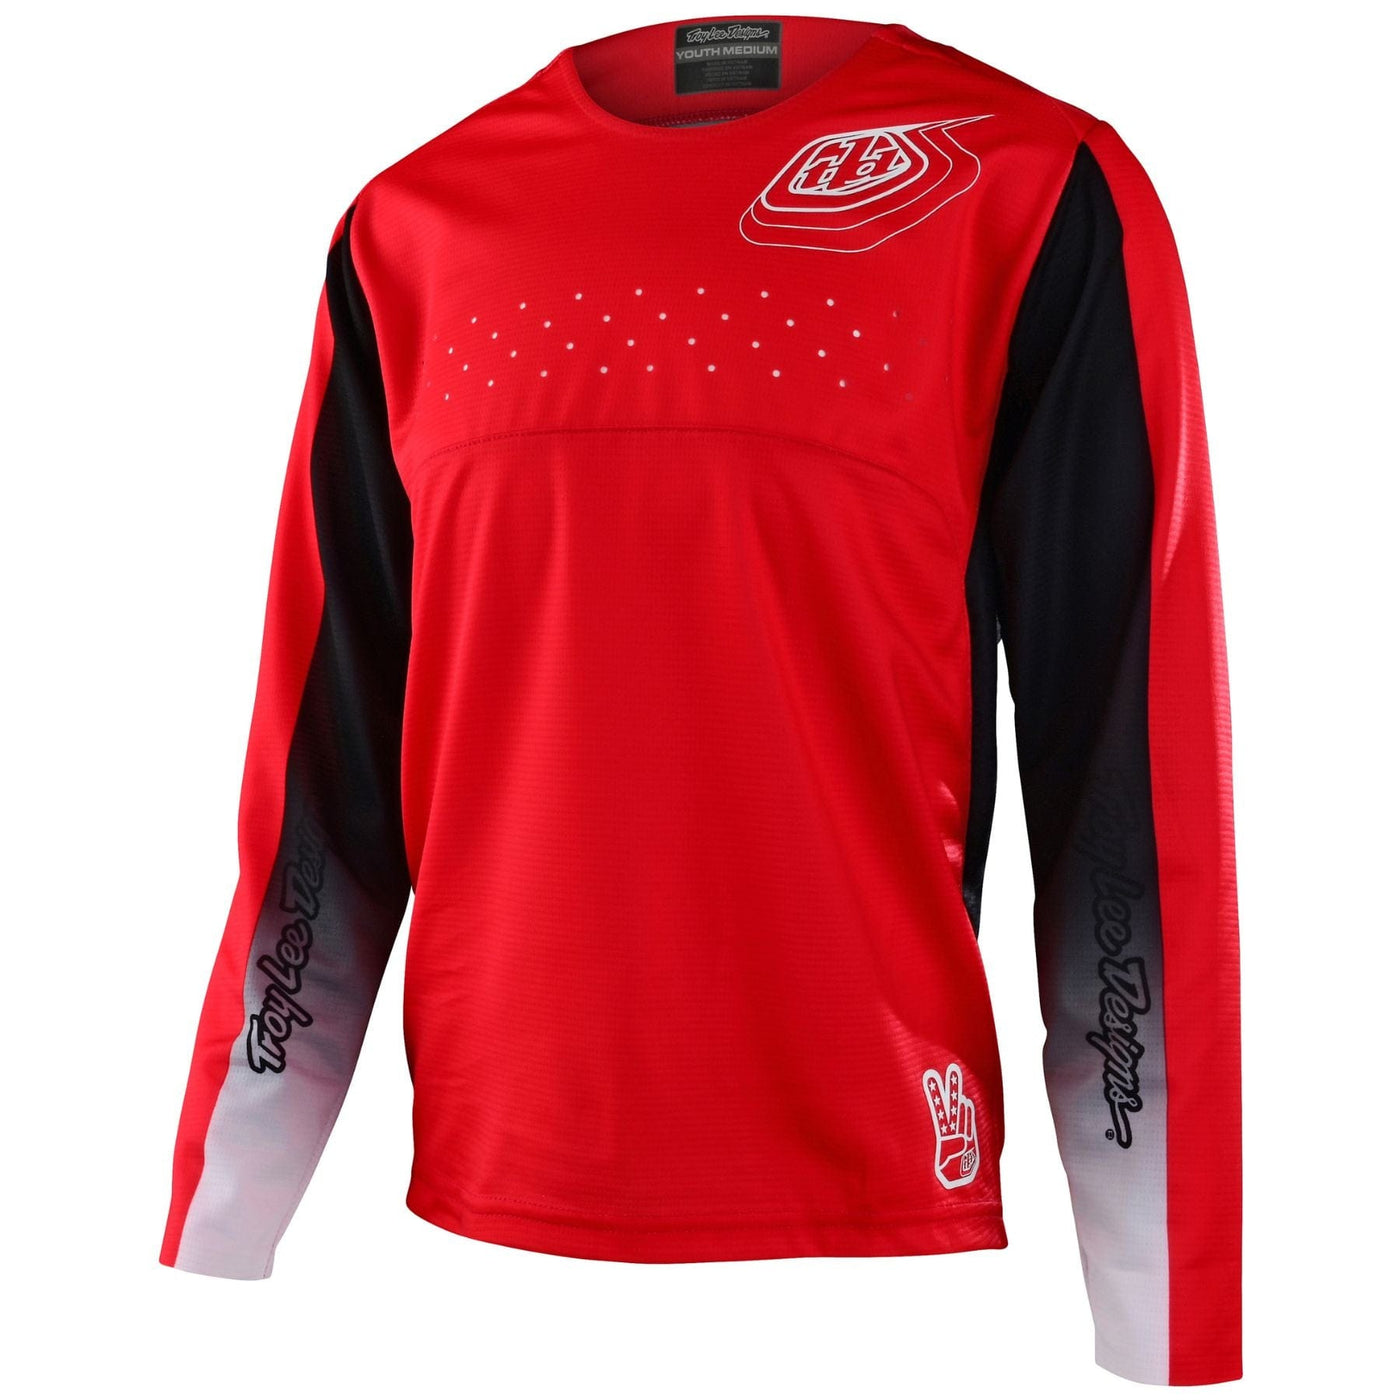 Troy Lee Designs Sprint Youth Jersey Richter - Race Red